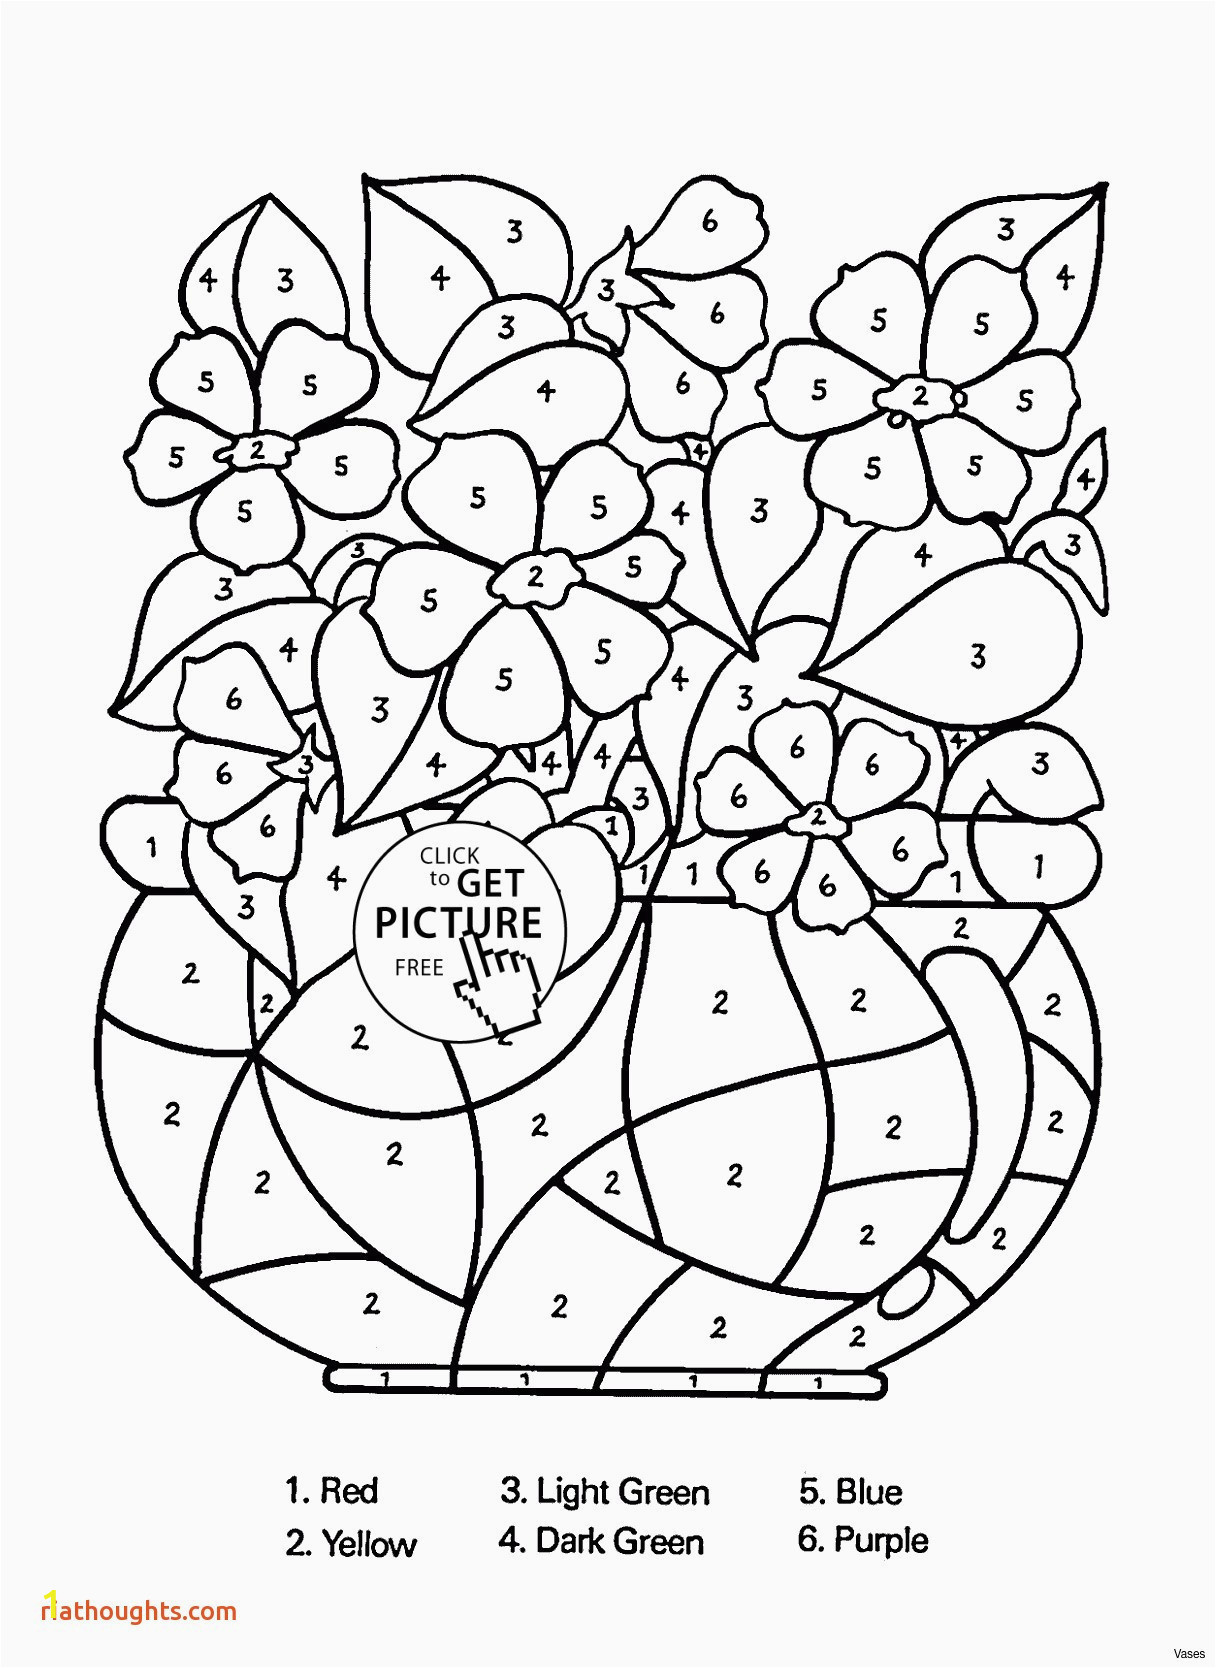 dutch tulip vase of elegant tulip pictures yepigames me with regard to vases flower vase coloring page pages flowers in a top i 0d and simple tulip coloring